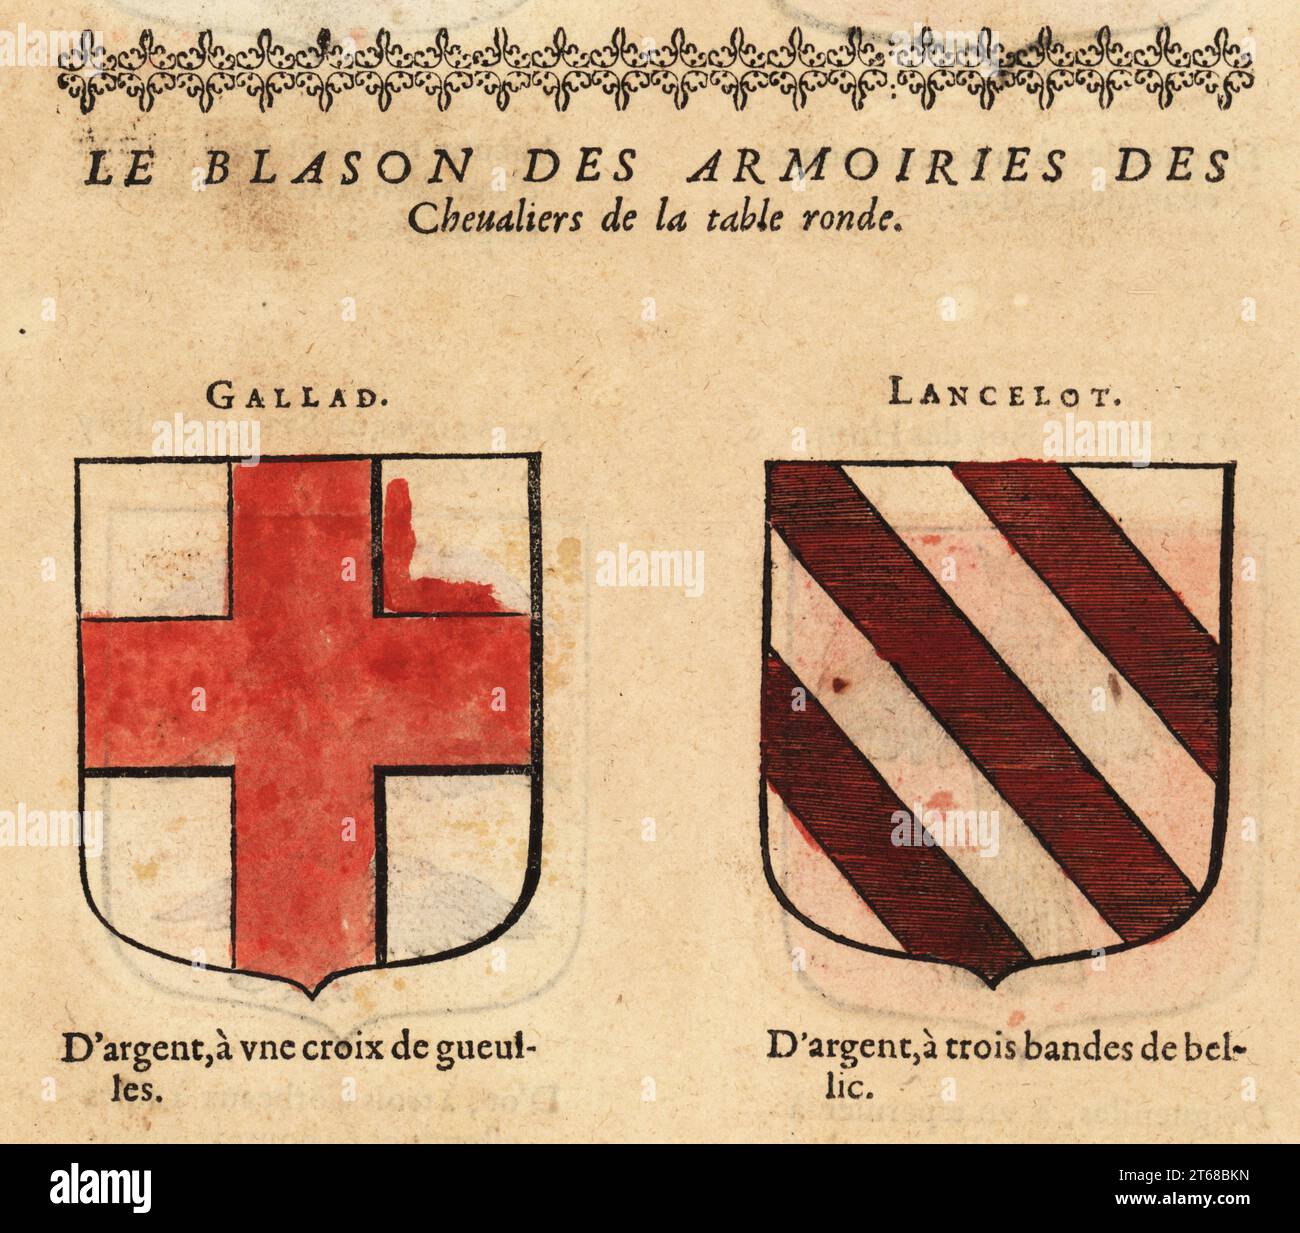 Coats of arms of King Arthurs Knights of the Round Table: Sir Galahad, with red cross, and Sir Lancelot du Lac, with three crimson bands. Chevaliers de la table rone: GALLAD, LANCELOT. Handcoloured woodblock engraving from Hierosme de Baras Le Blason des Armoiries, Chez Rolet Boutonne, Paris, 1628. Stock Photo